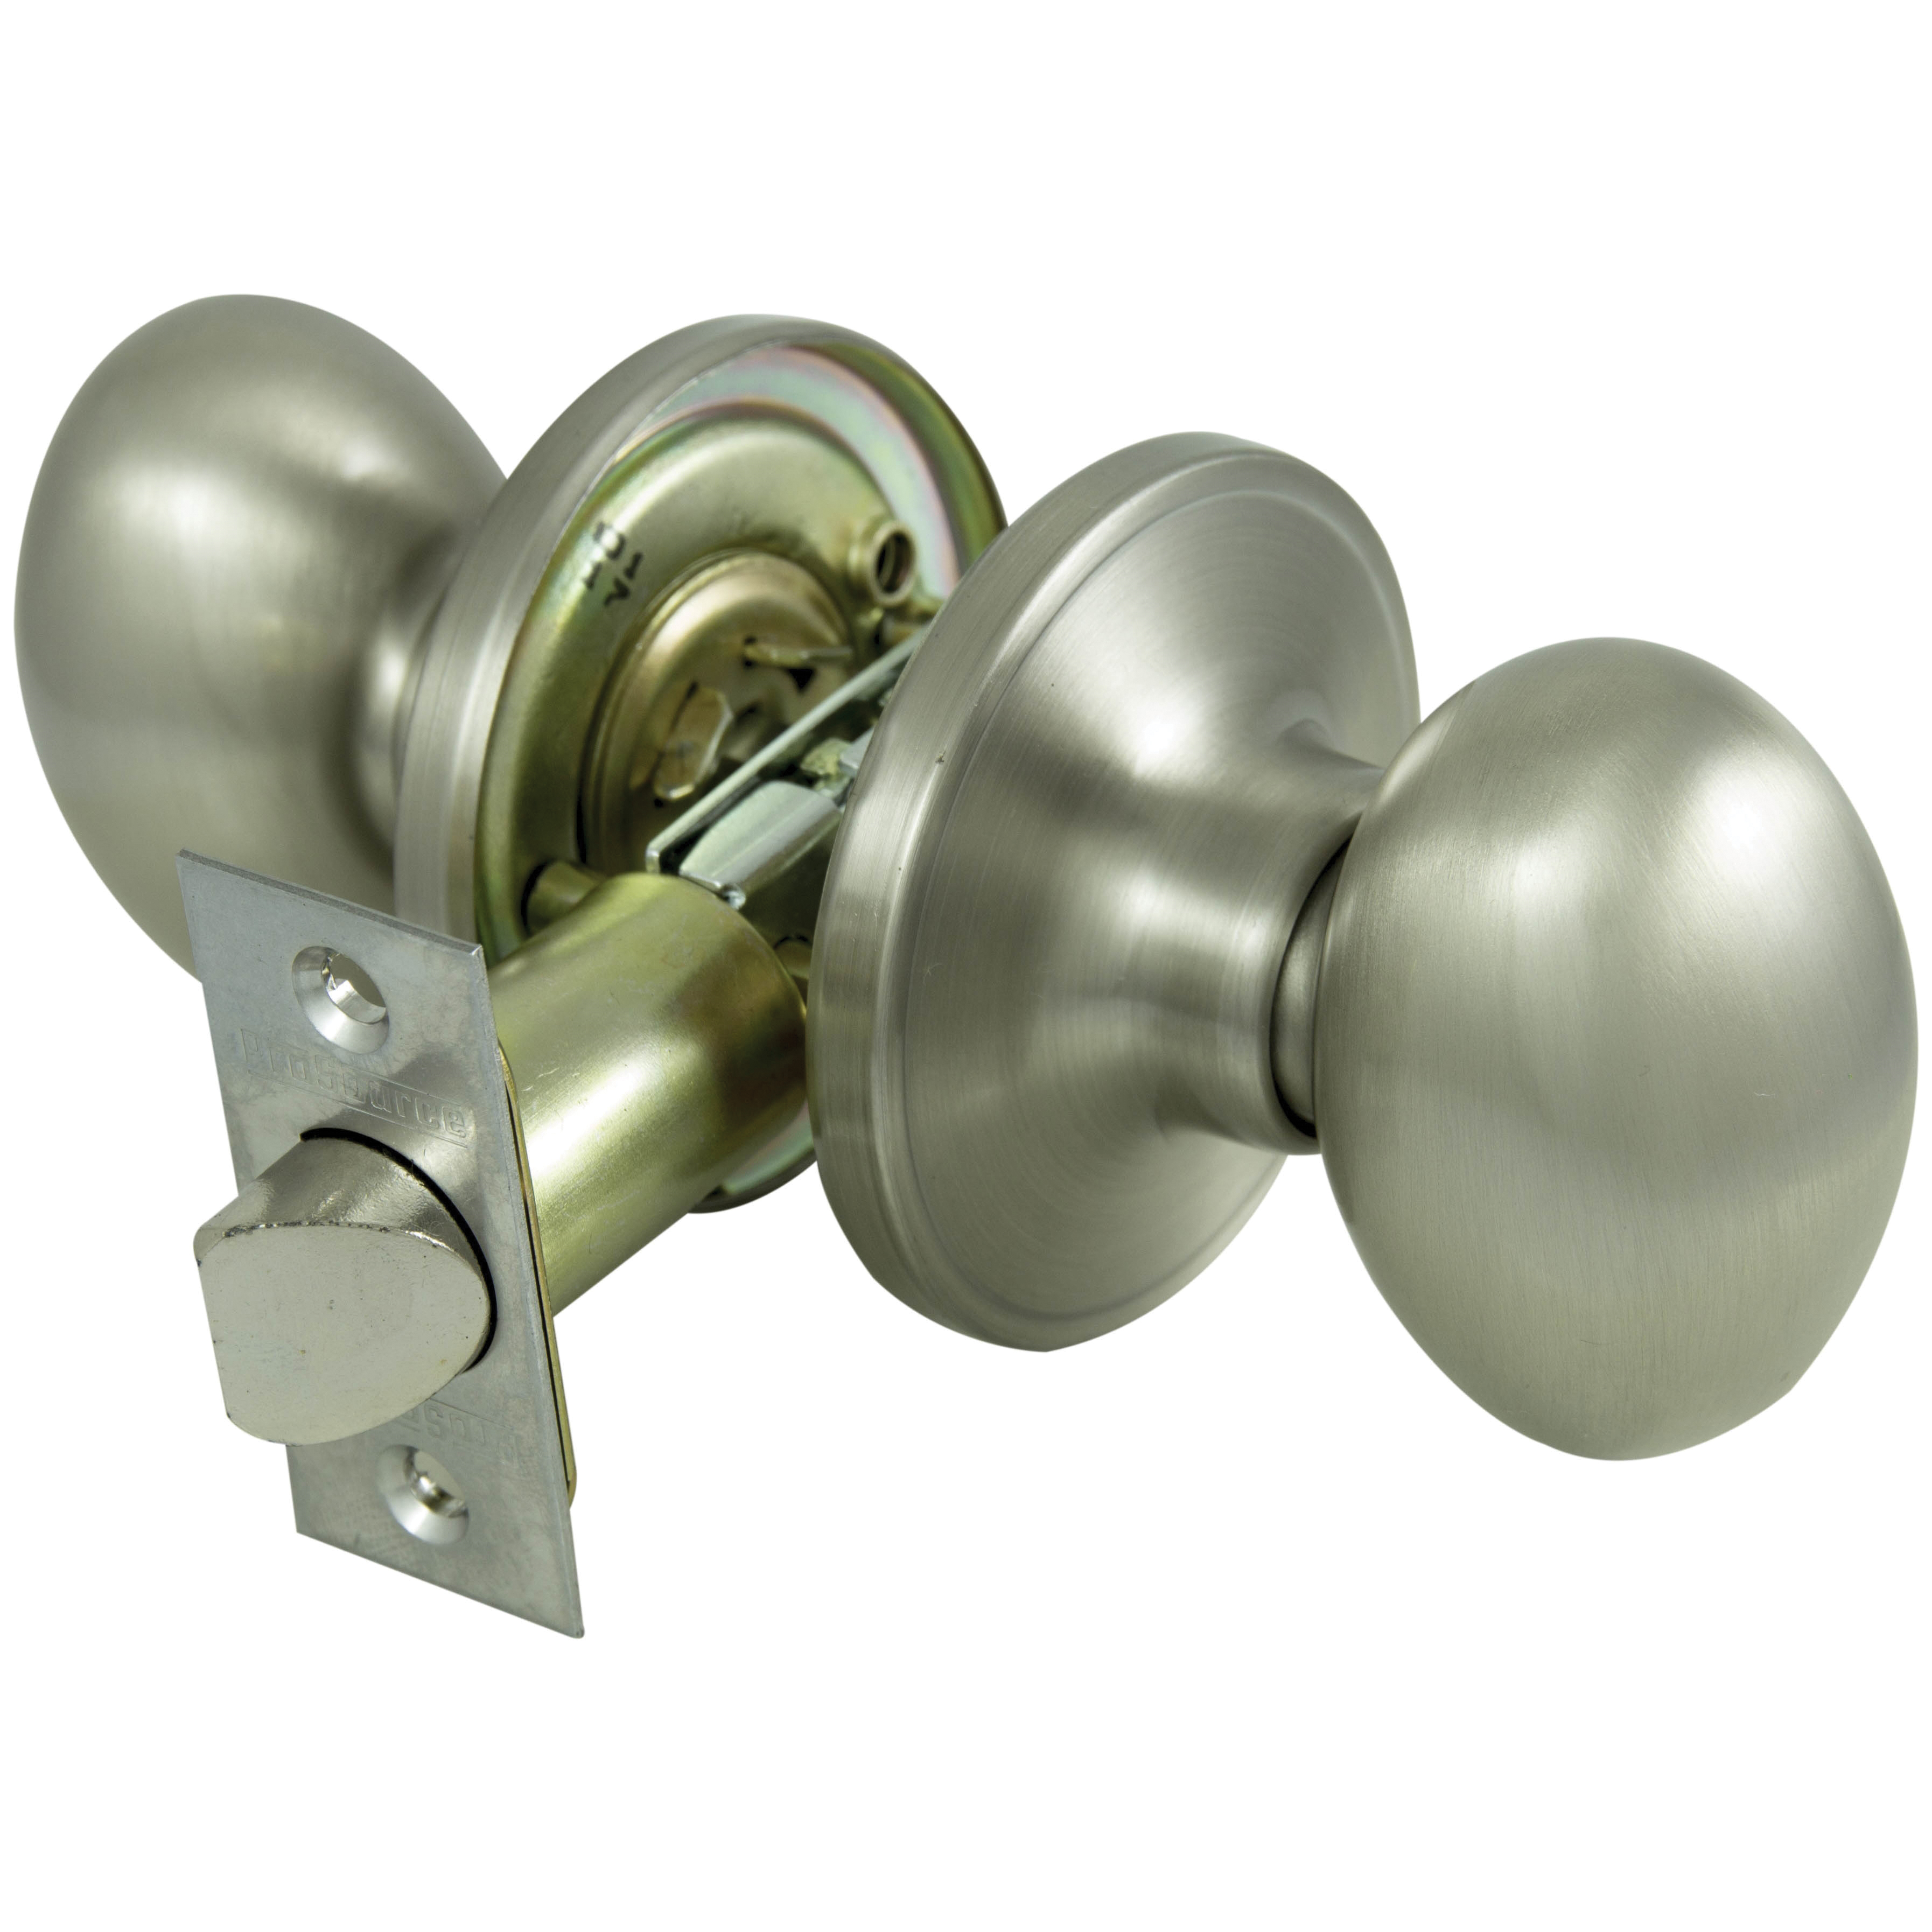 TYLP30V-PS Passage Knob, Metal, Satin Nickel, 2-3/8 to 2-3/4 in Backset, 1-3/8 to 1-3/4 in Thick Door